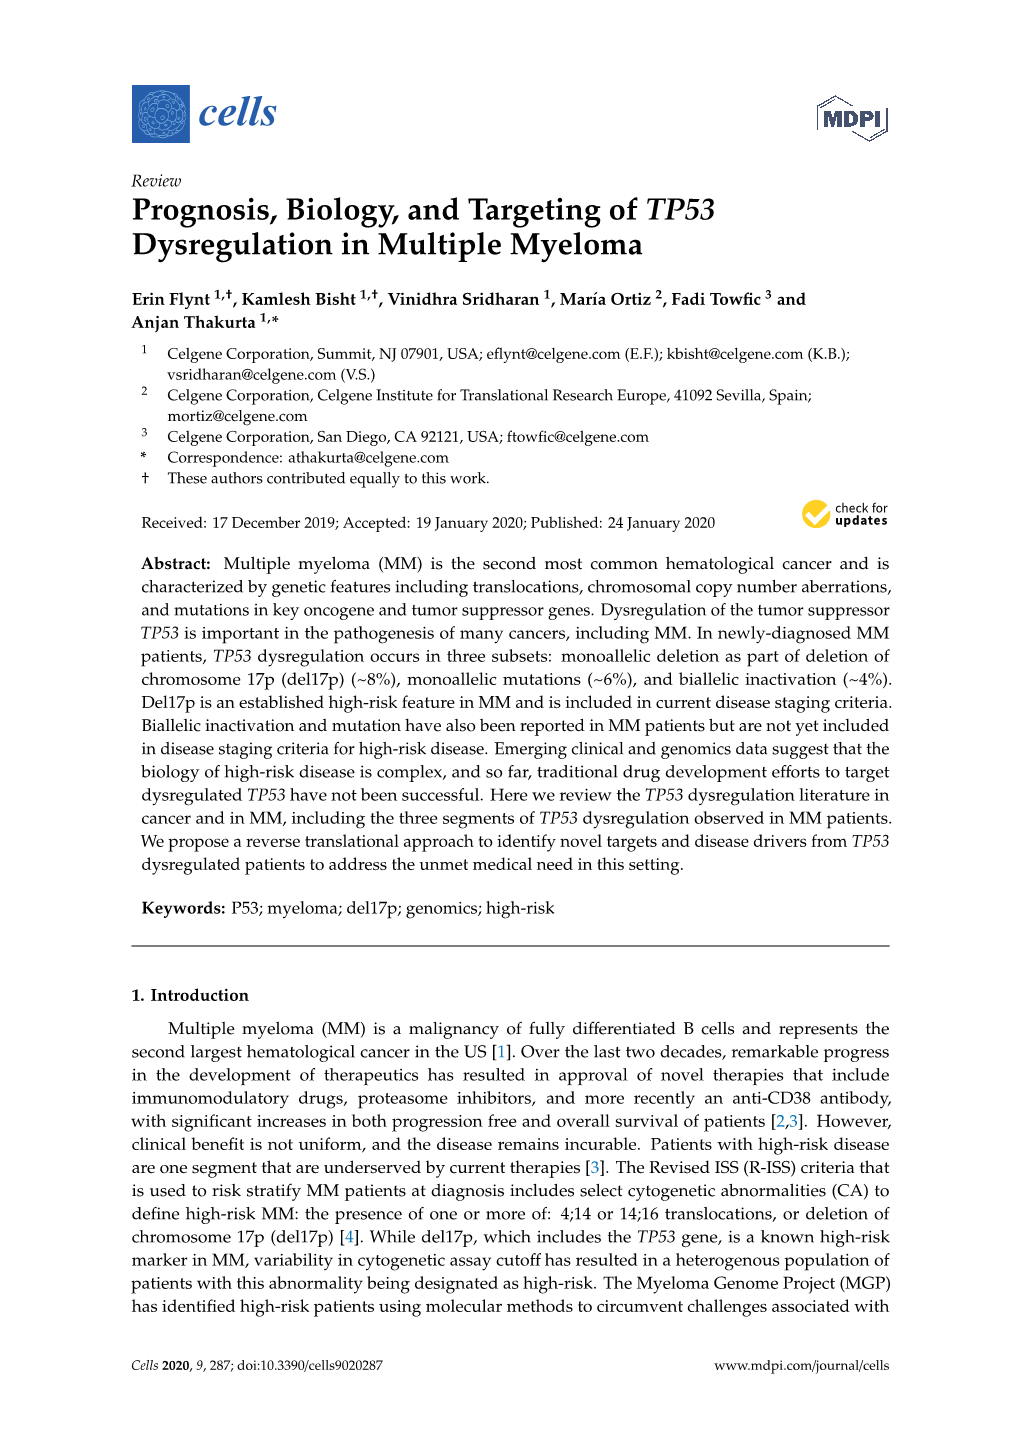 Prognosis, Biology, and Targeting of TP53 Dysregulation in Multiple Myeloma